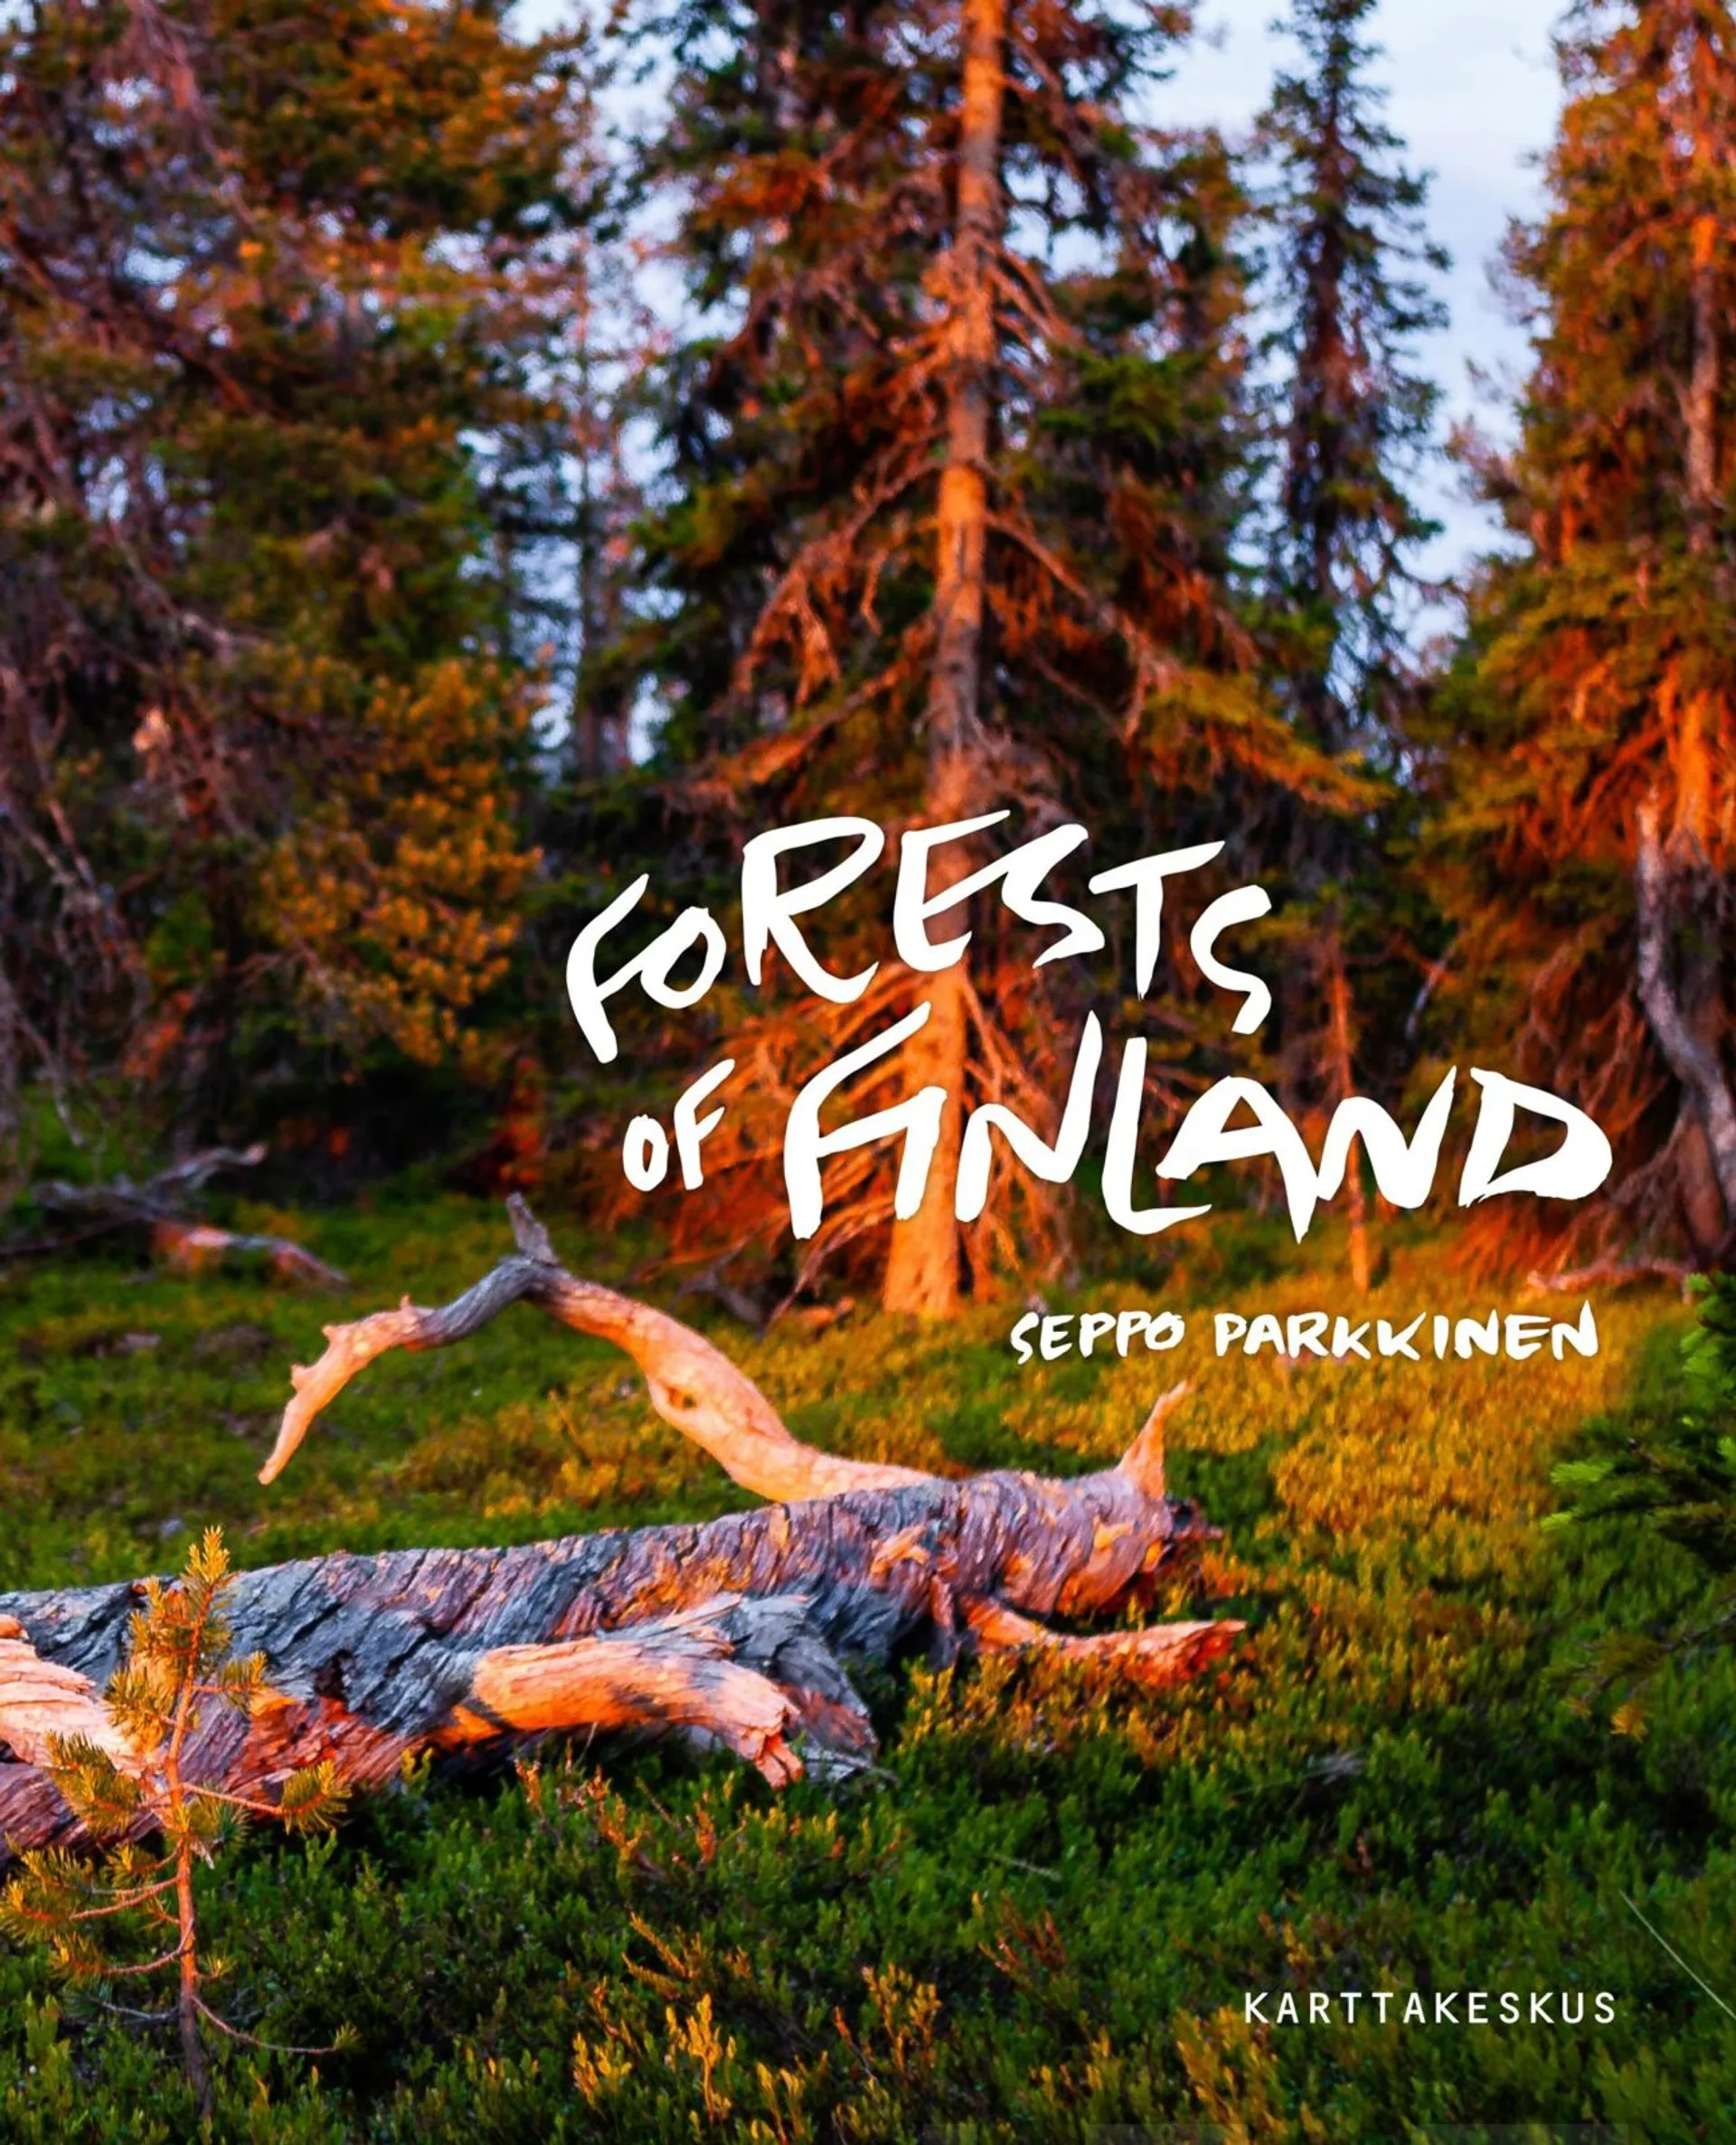 Parkkinen, Forests of Finland